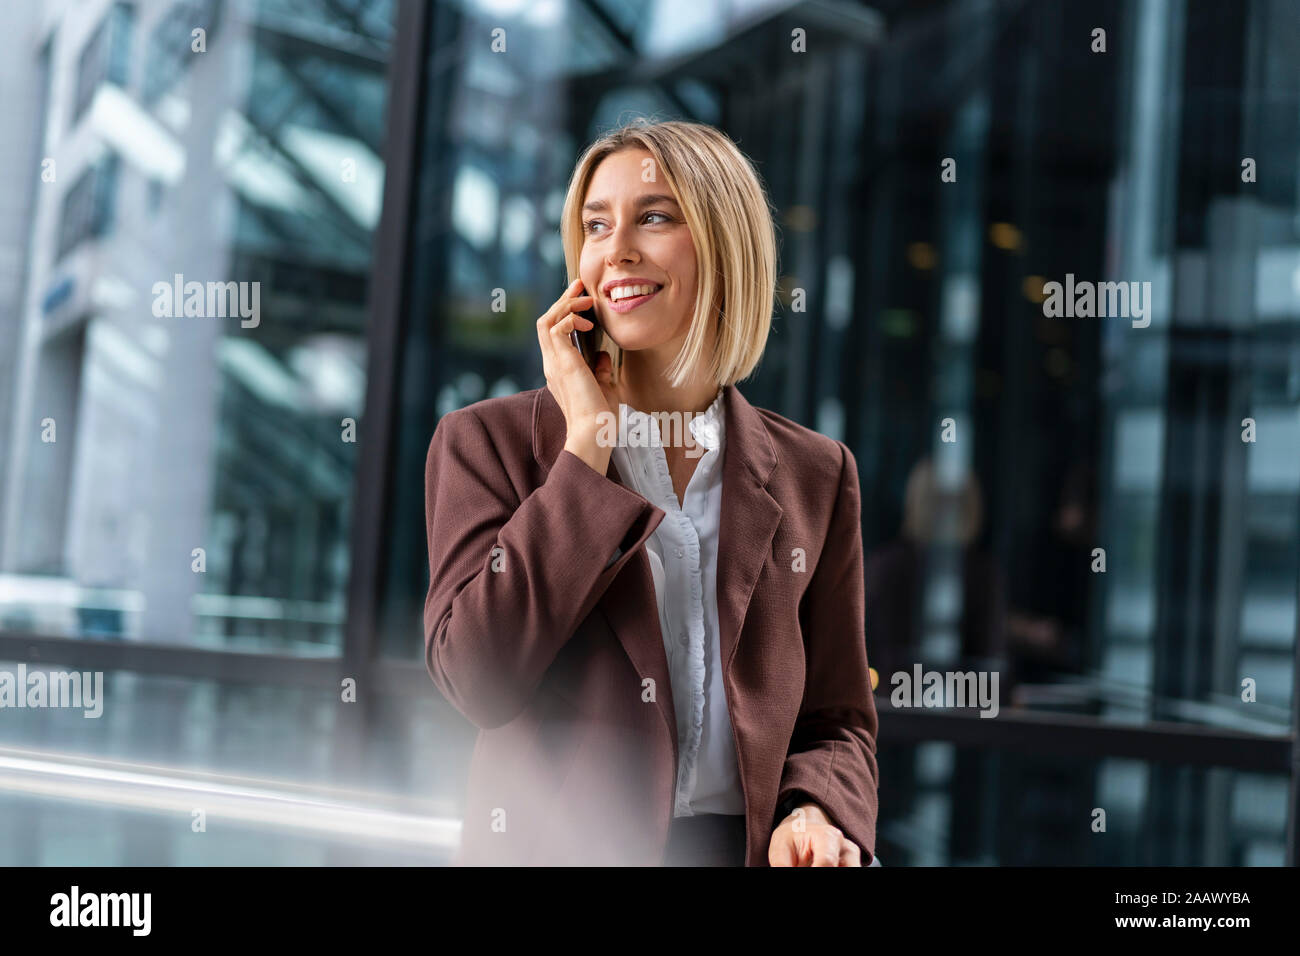 Smiling young businesswoman on the phone in the city Stock Photo